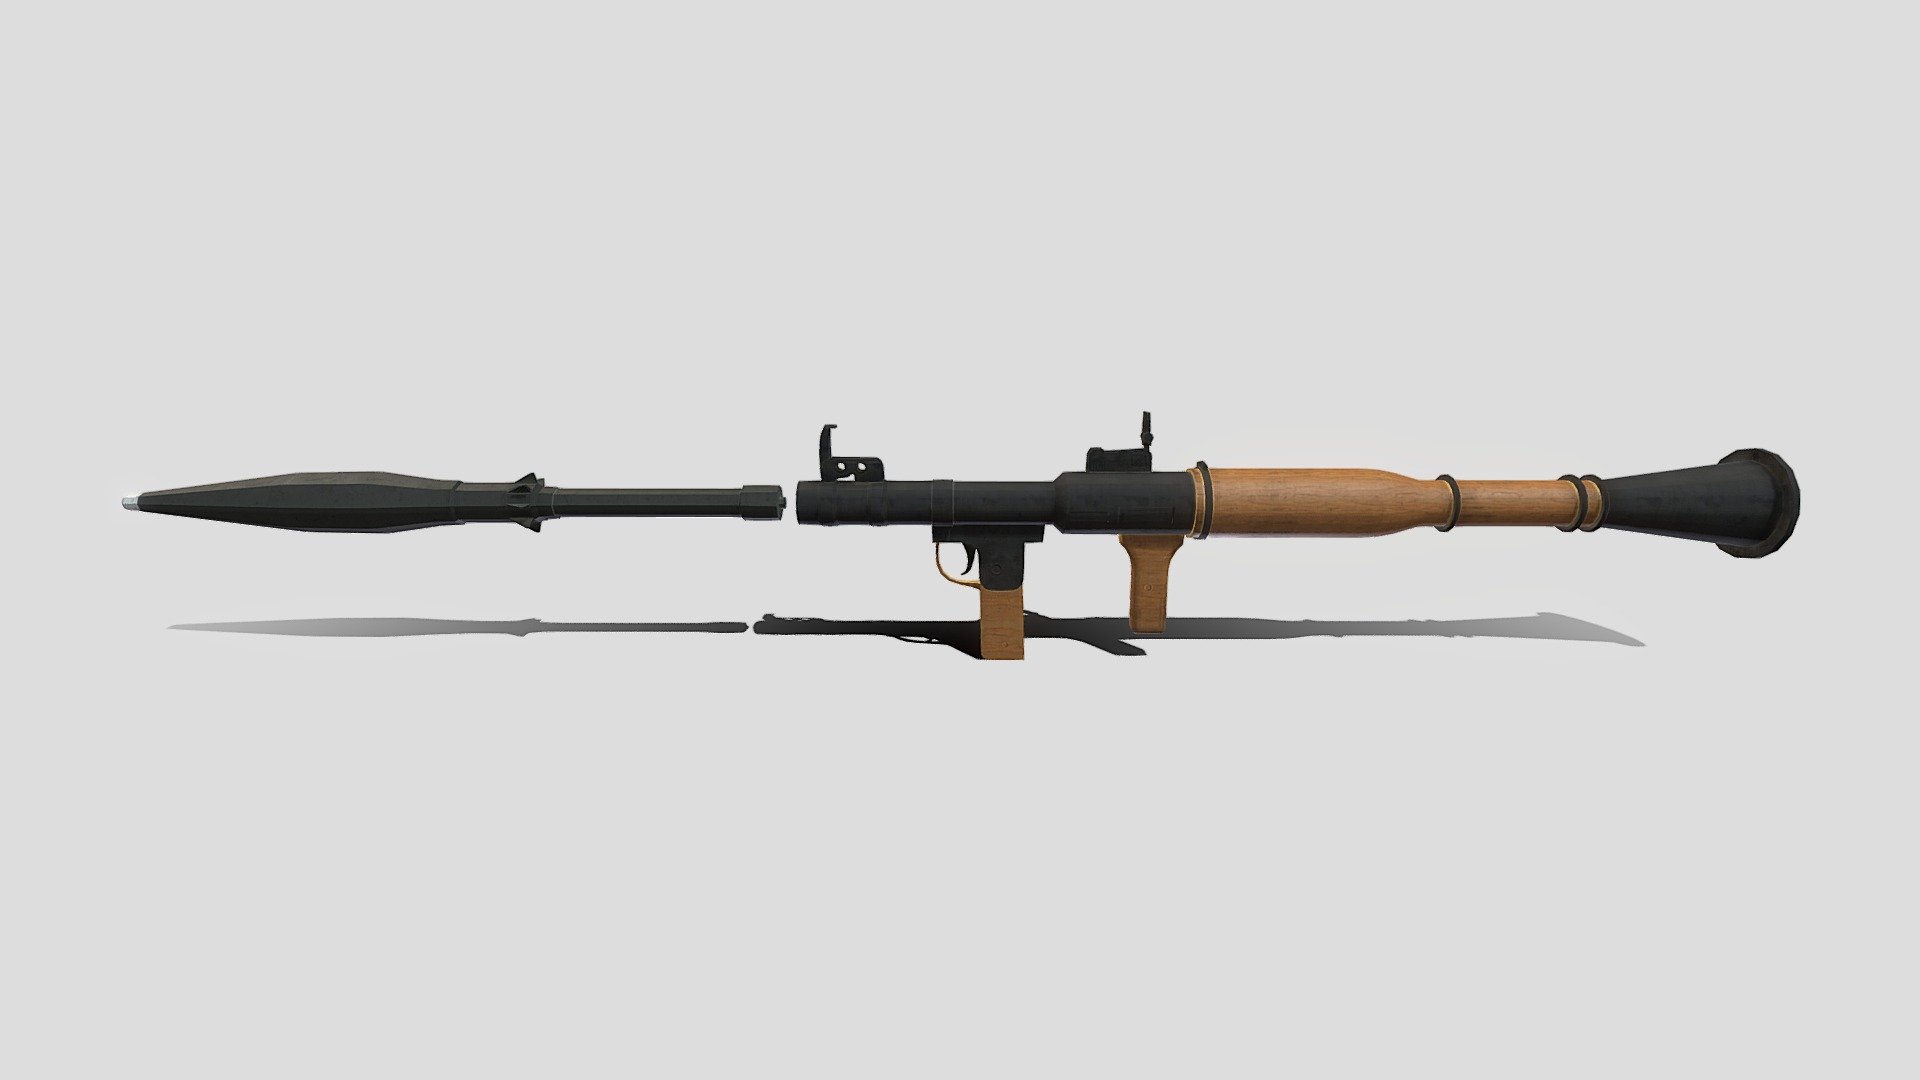 RPG means a rocket-propelled grenade, a weapon that launches explosive warheads. Feel free to use it 3d model